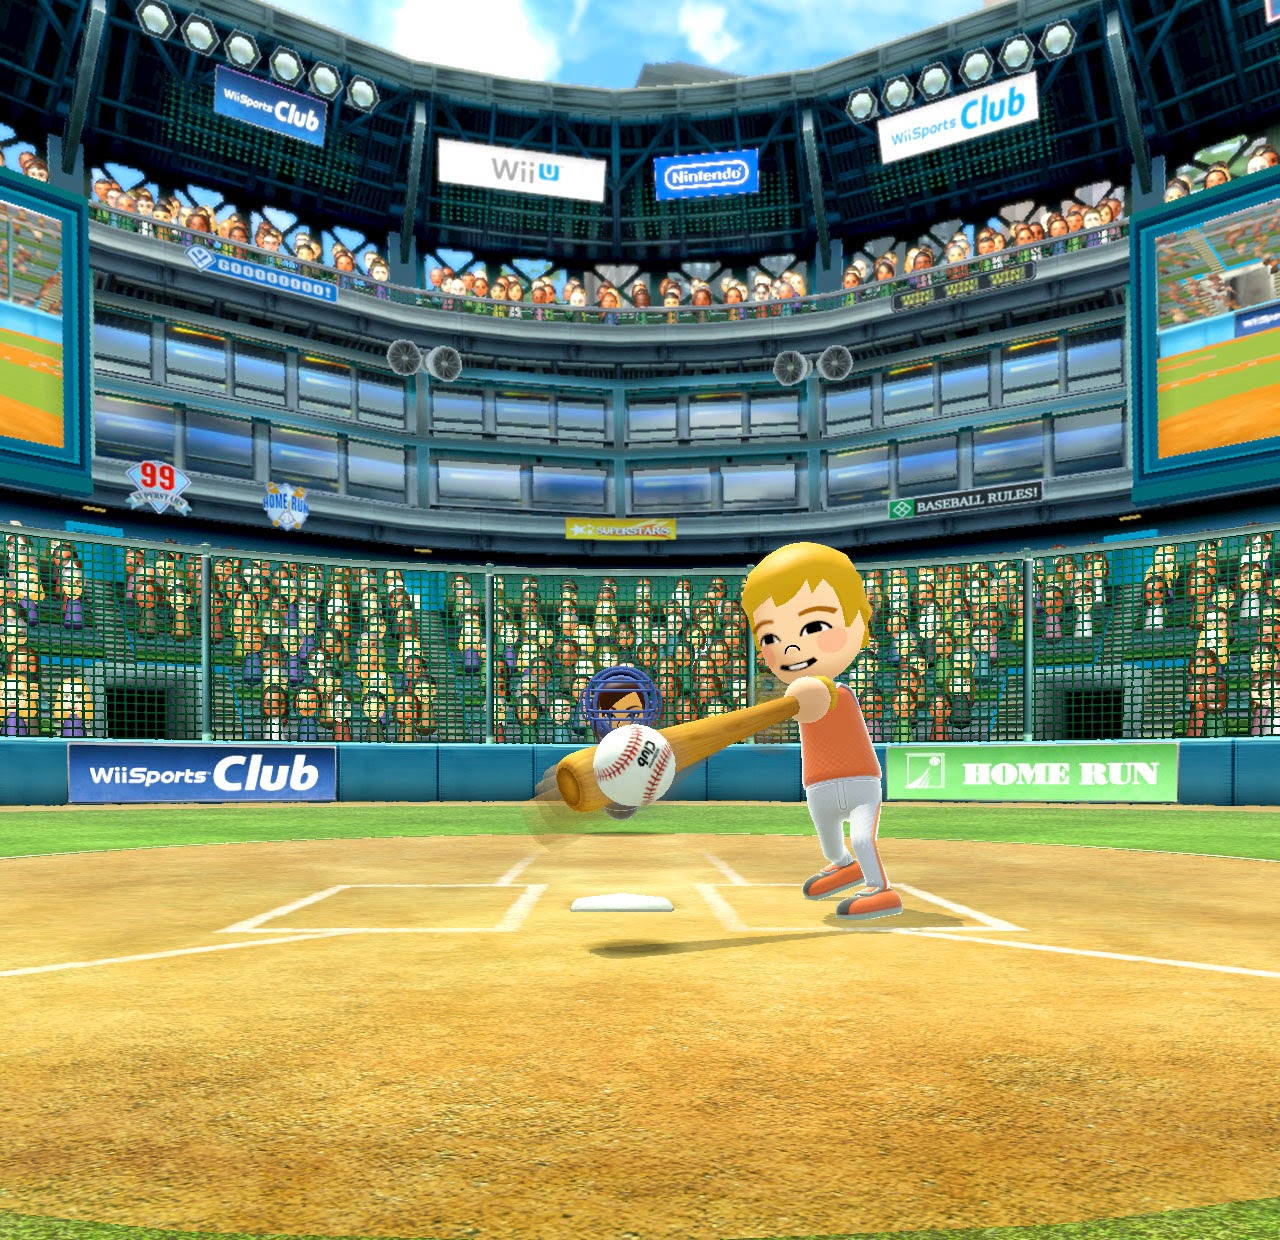 Wii Sports Club Is Complete June 28th - Maxi-Geek